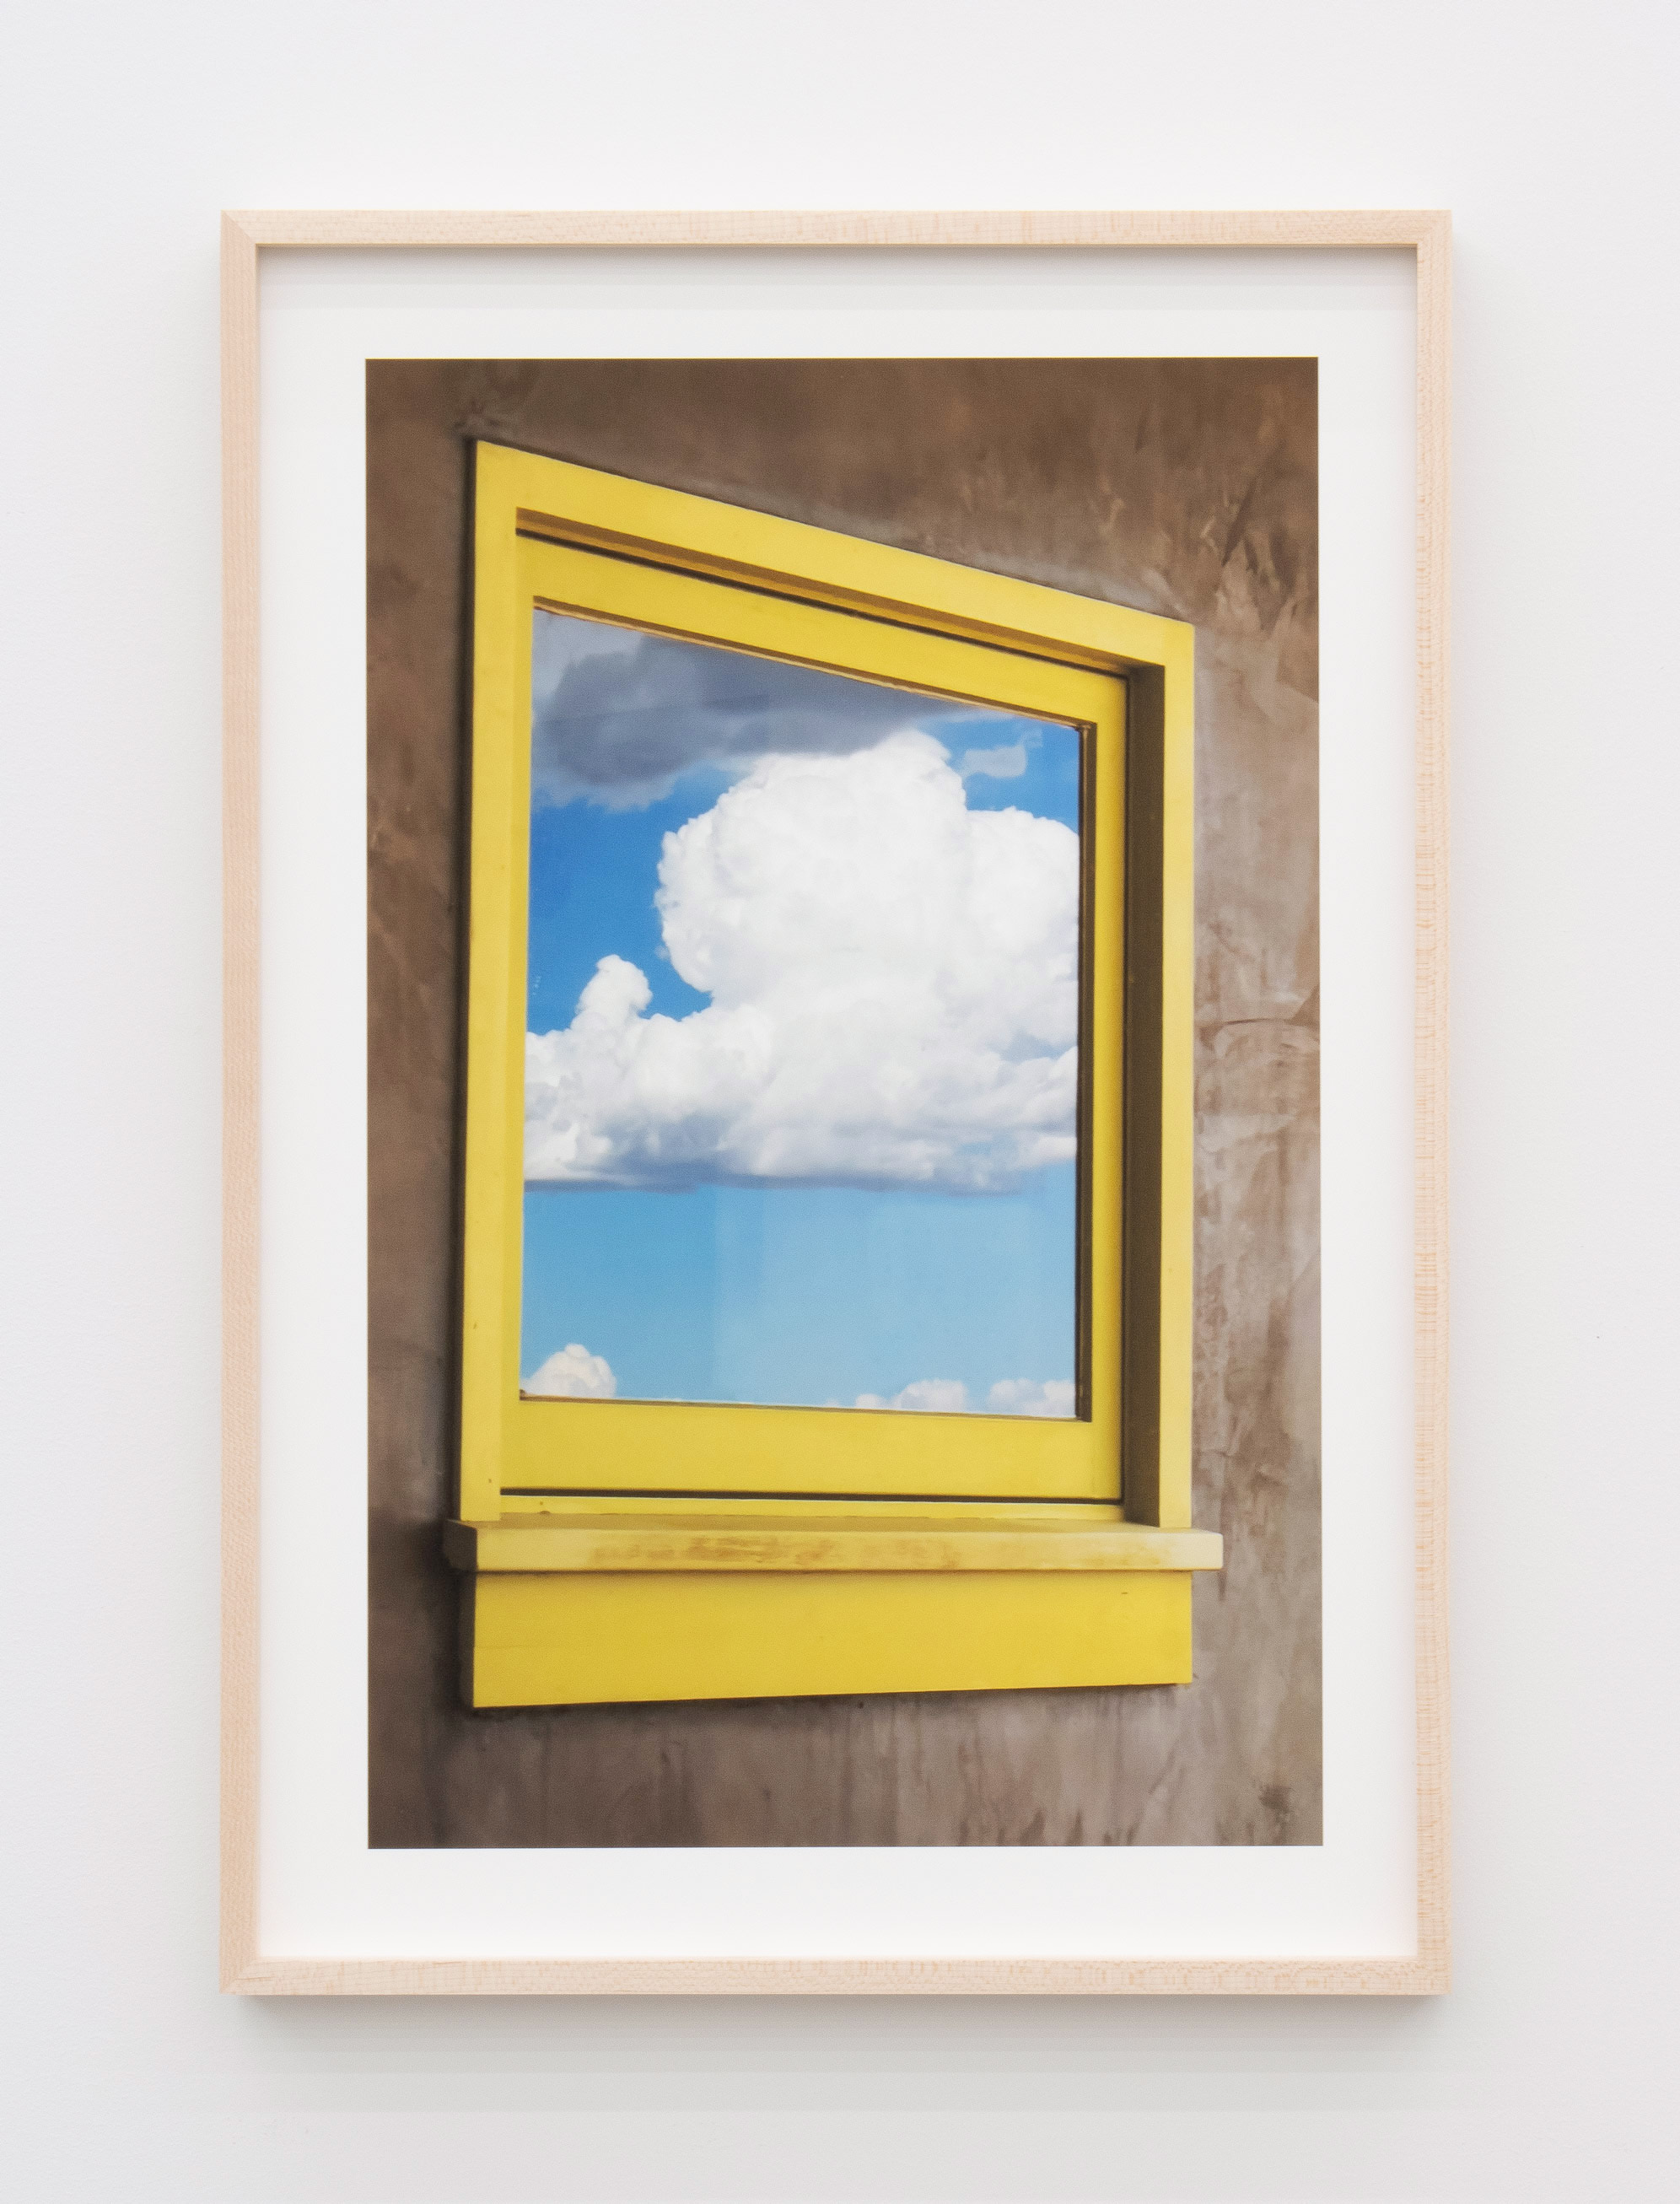 Jennifer Bolande, Window with Cloud, 2023, Archival pigment print, 19 x 13 in.